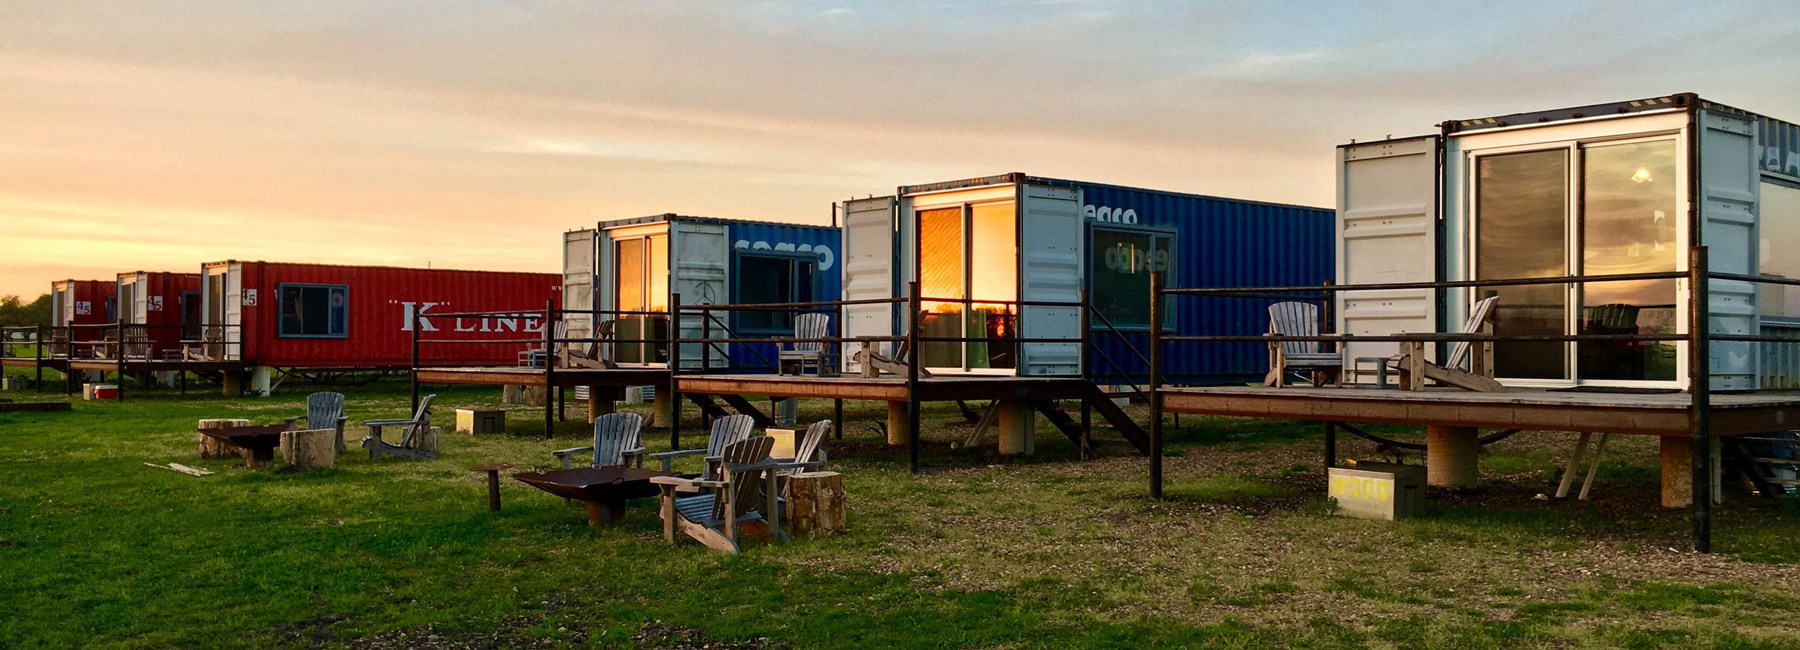 eco-chic shipping container hotel lets you try before you buy your own